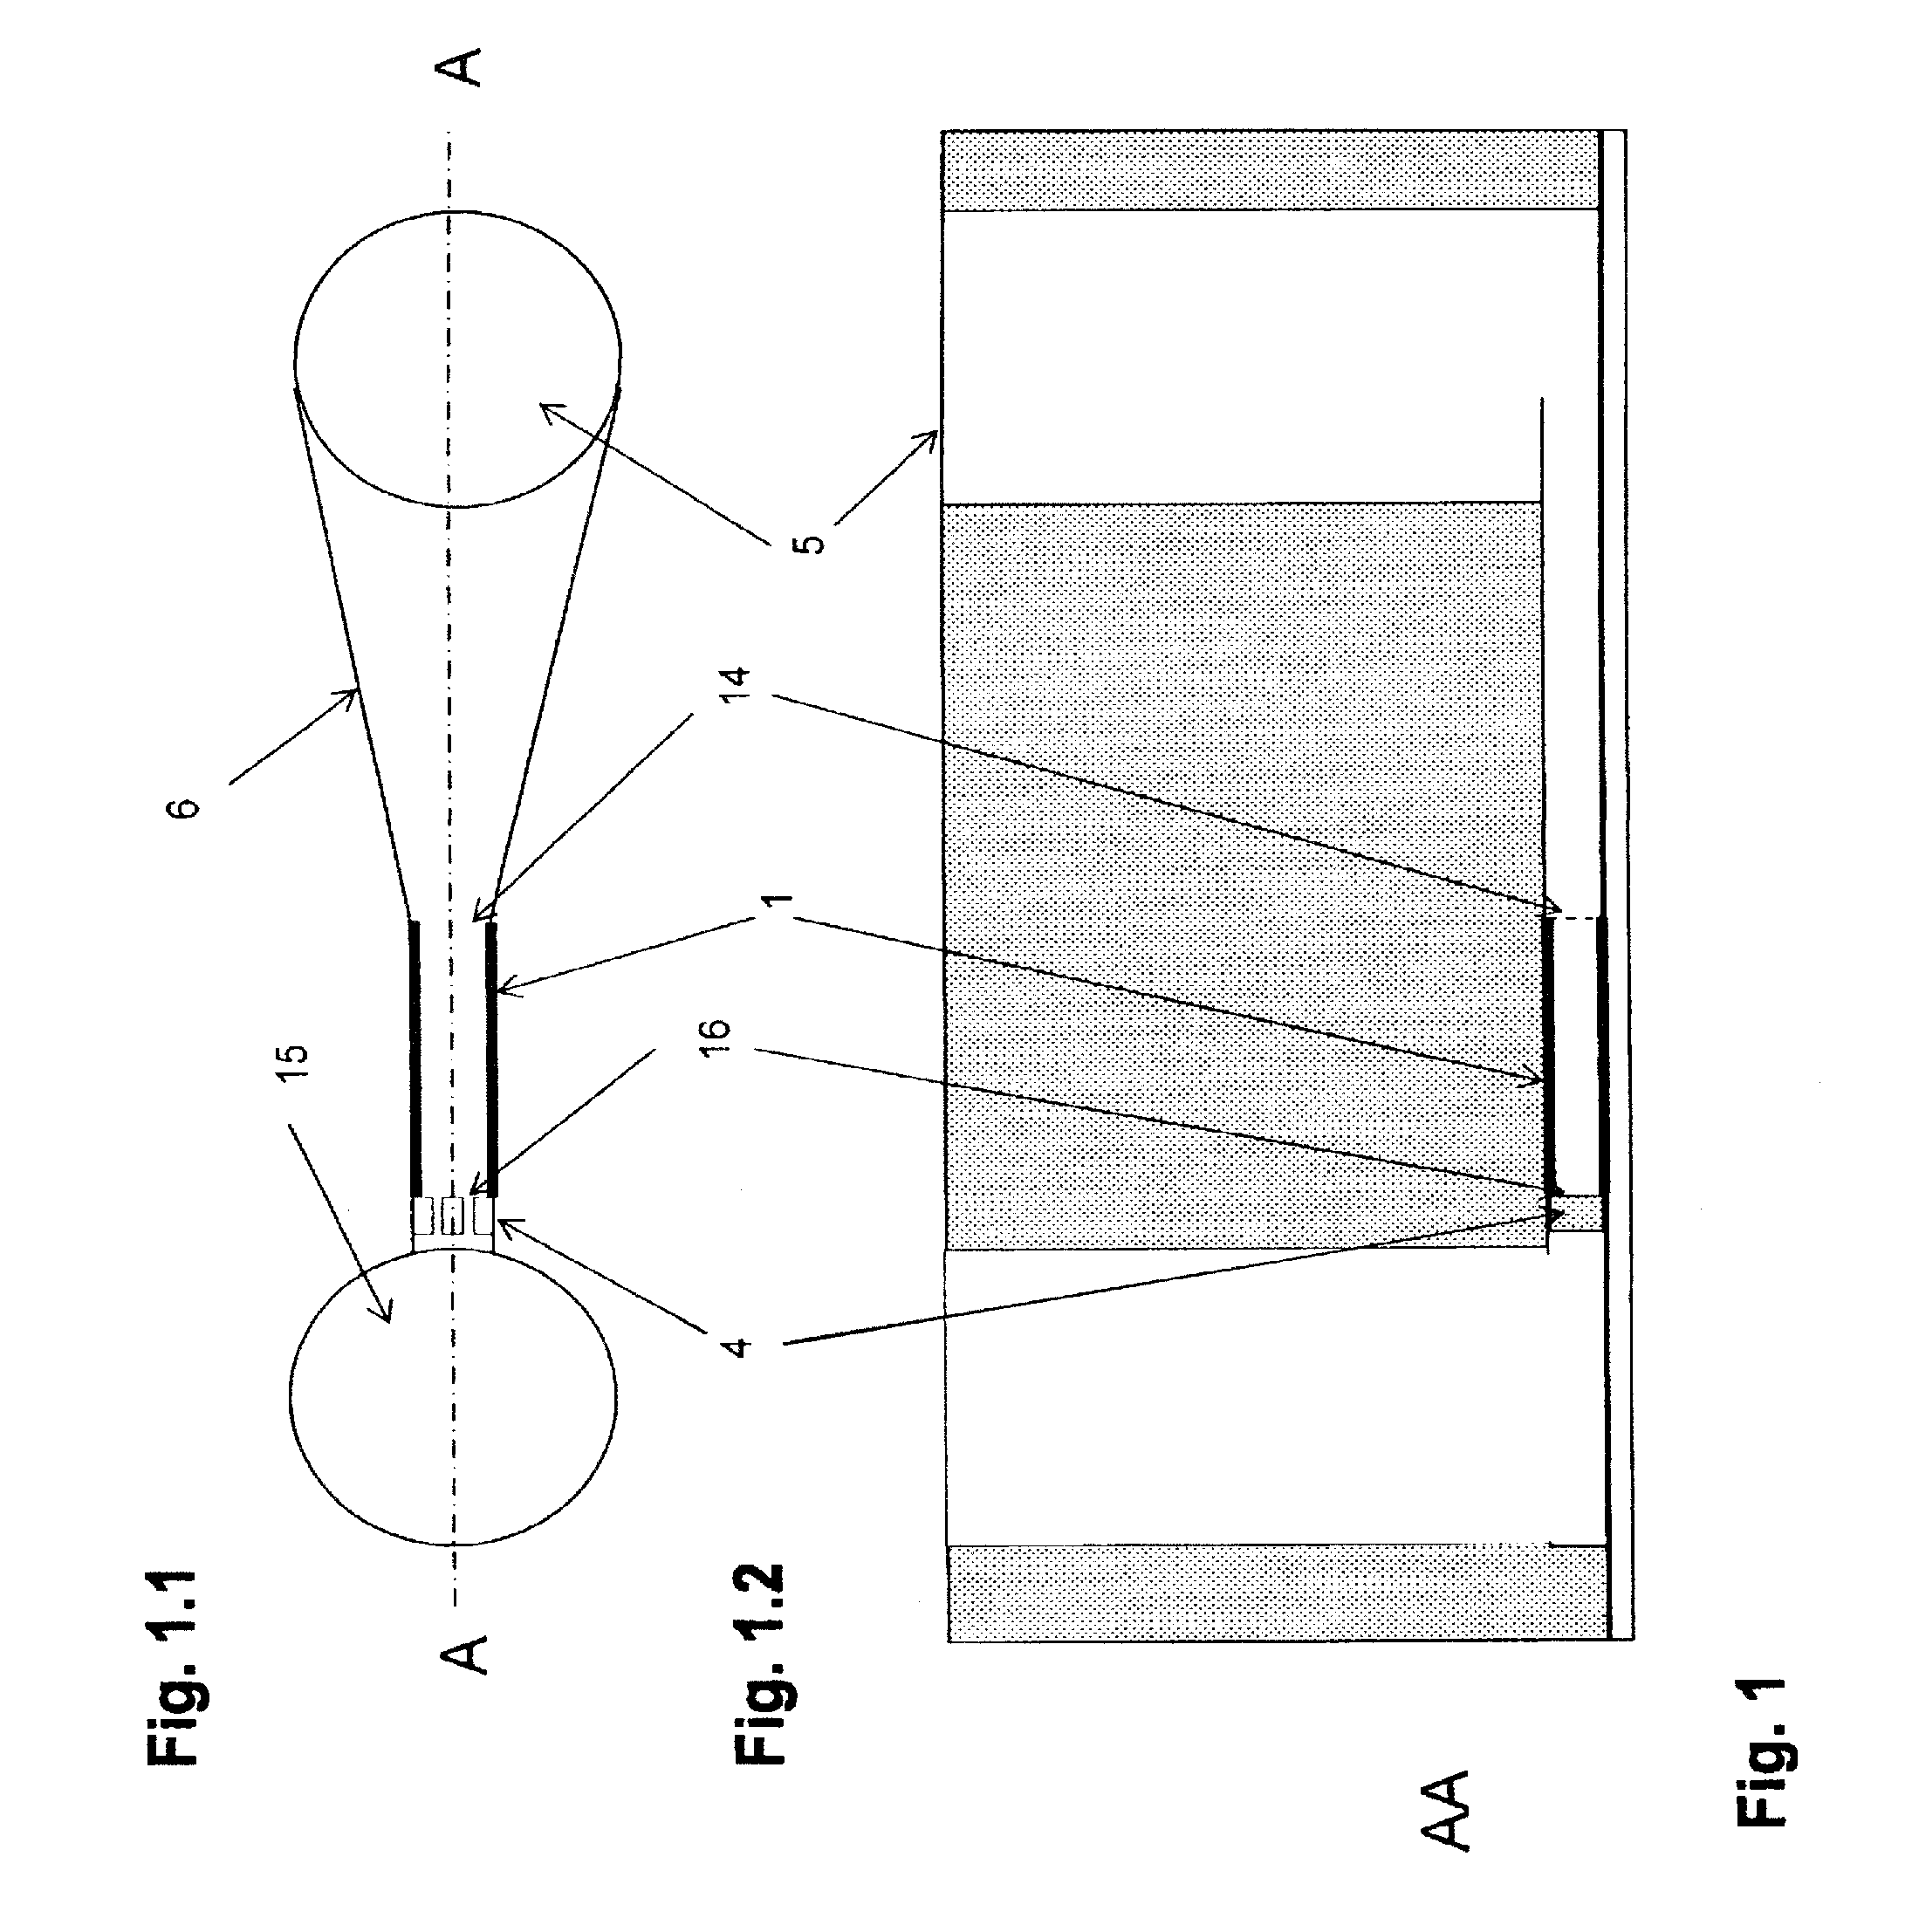 Assay device and method for performing biological assays